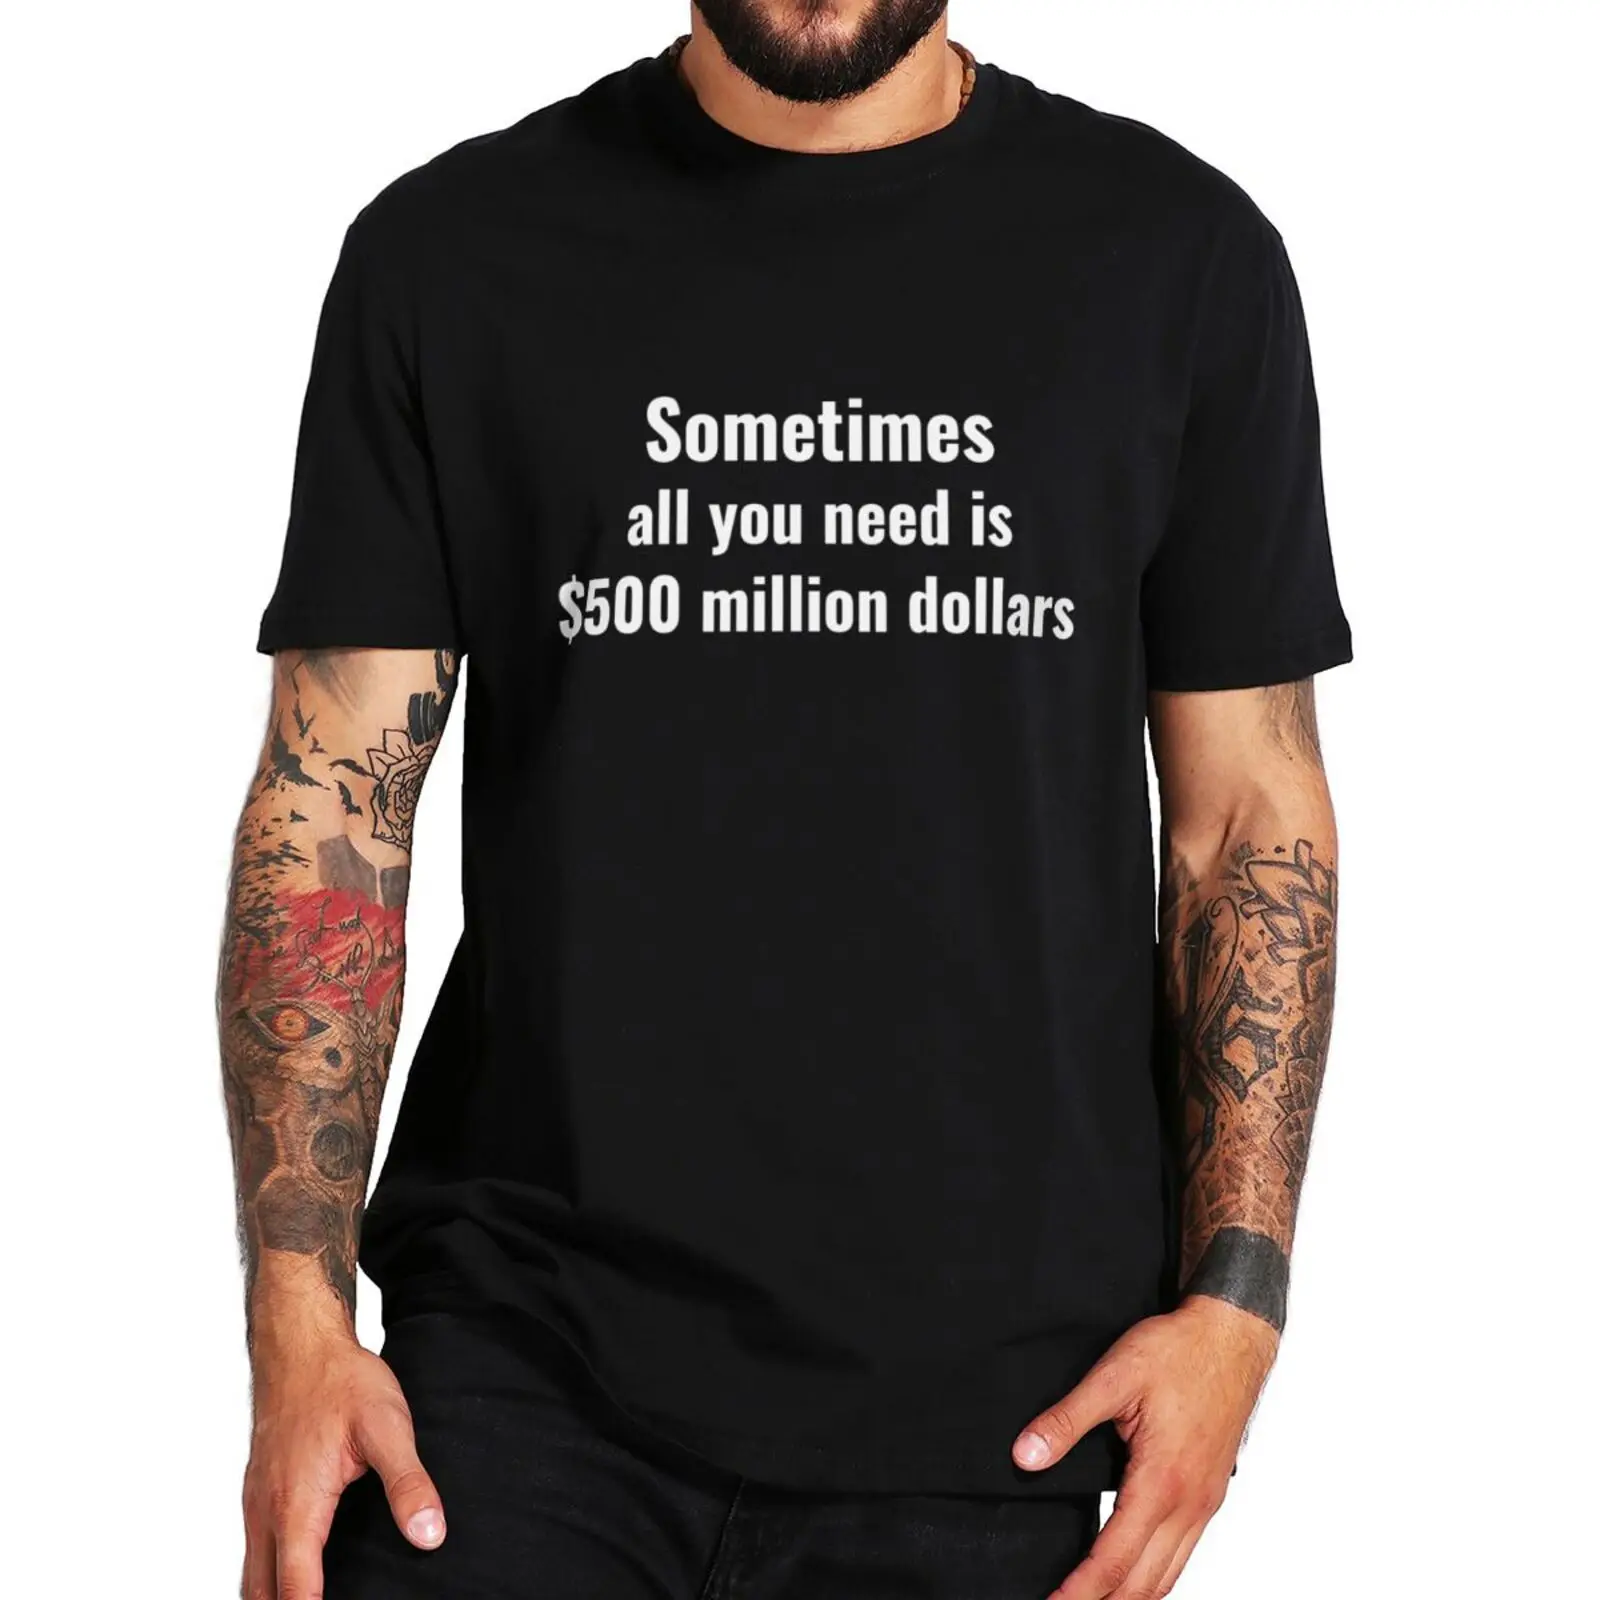 

Sometimes All You Need Is 500 Million Dollars T Shirt Funny Sayings Humor Jokes Short Sleeve 100% Cotton Unisex Casual T-shirt